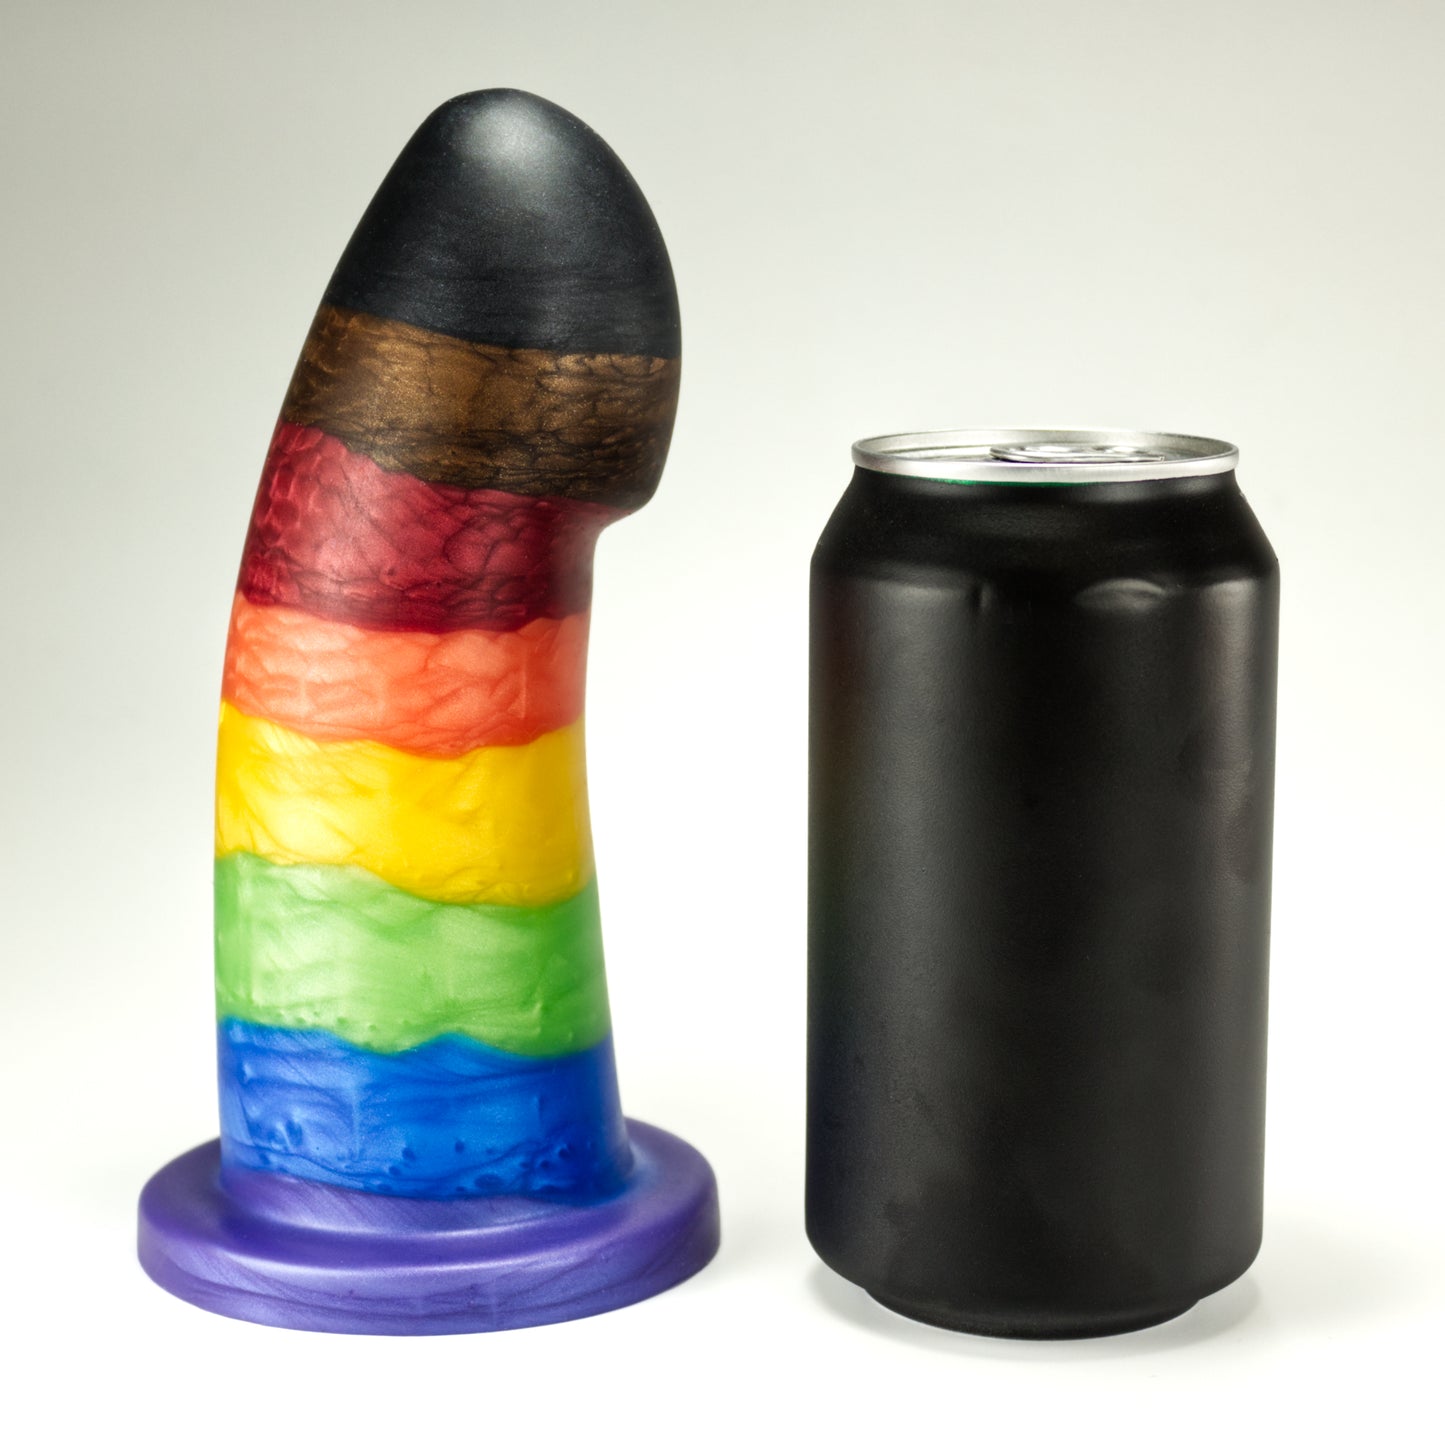 Side view of the Sidekick Extra Large next to a standard soda can, showing that the dildo is a little taller and nearly the same width as the can.